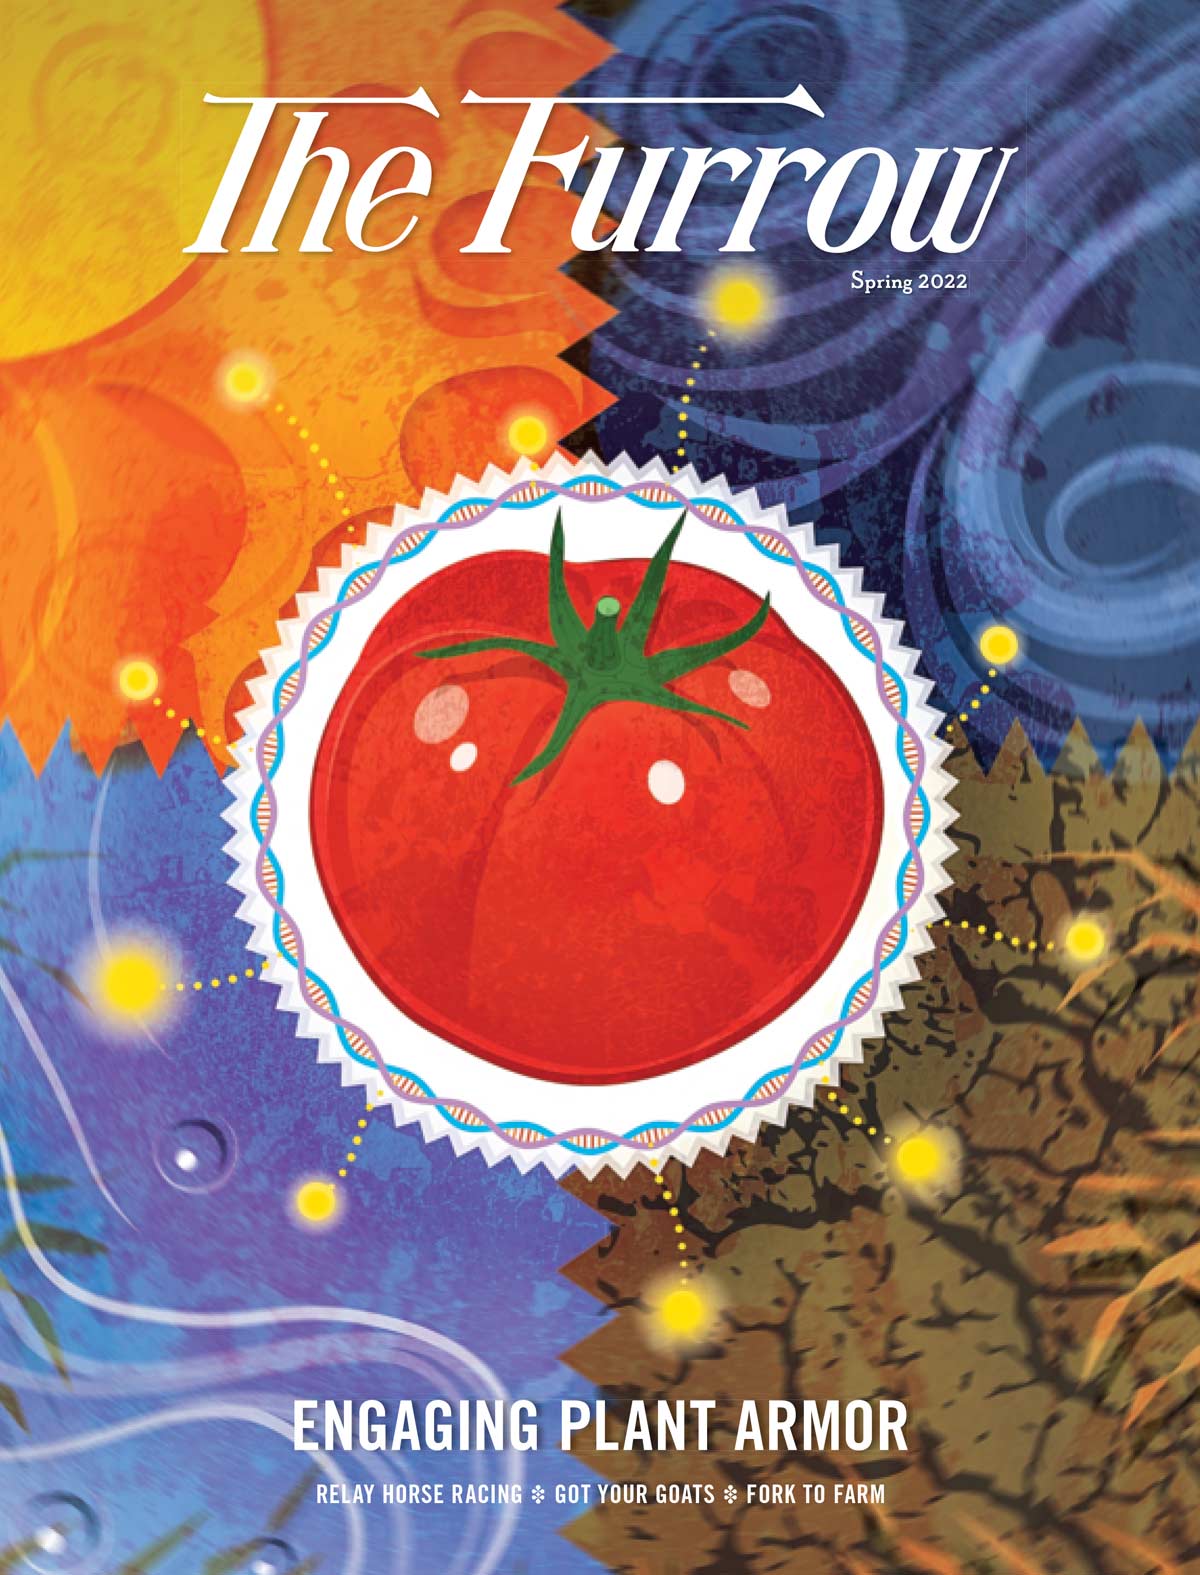 The Furrow - Spring 2022 Issue